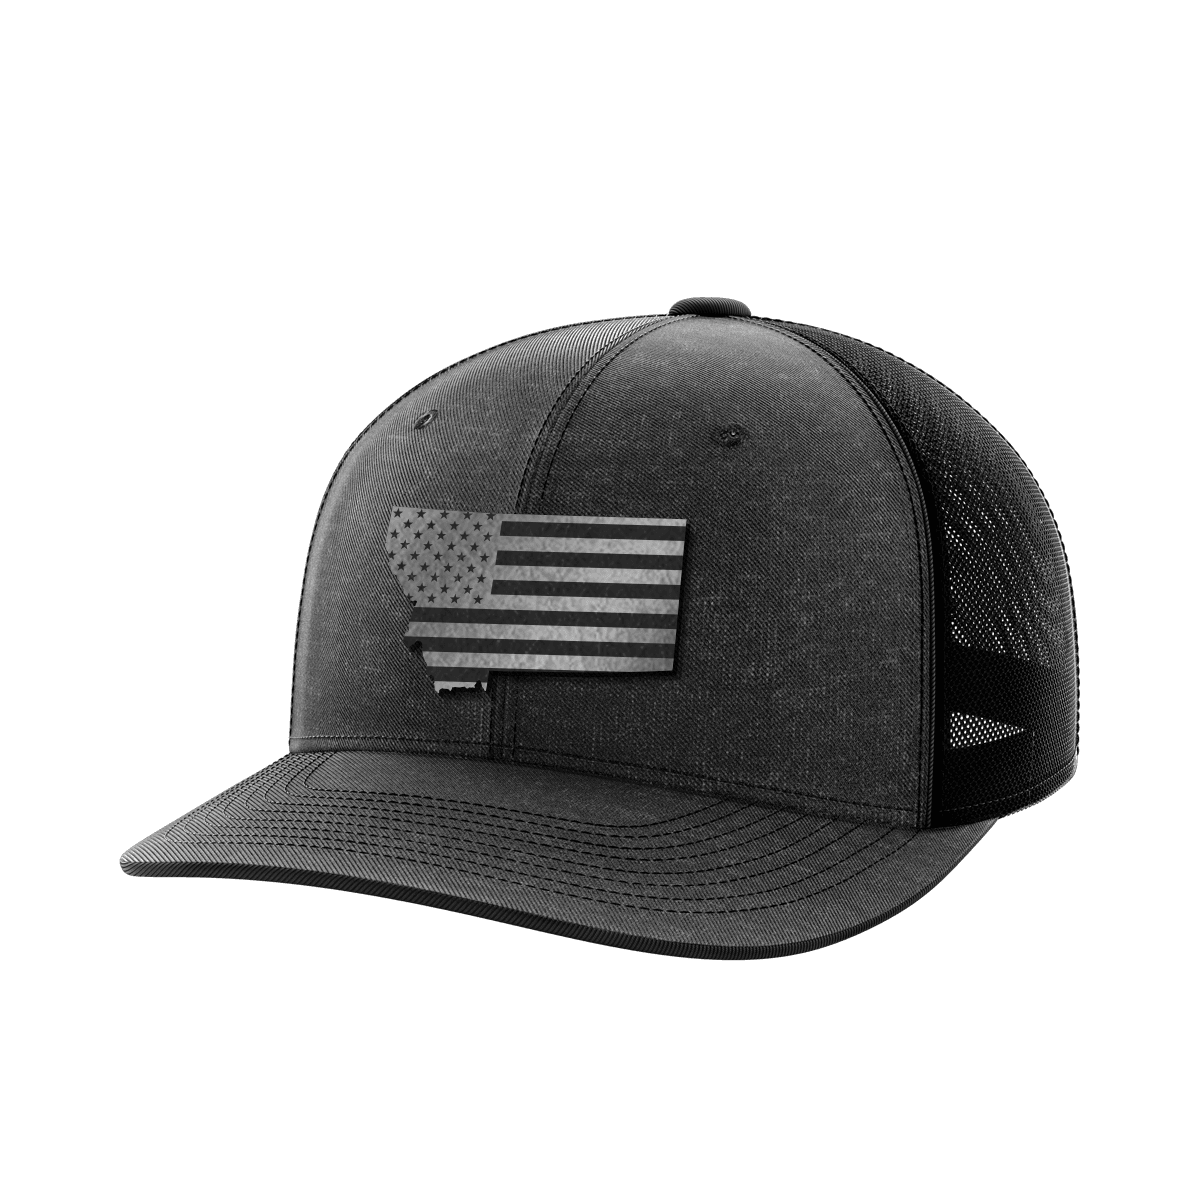 Montana United Collection (black leather) - Greater Half